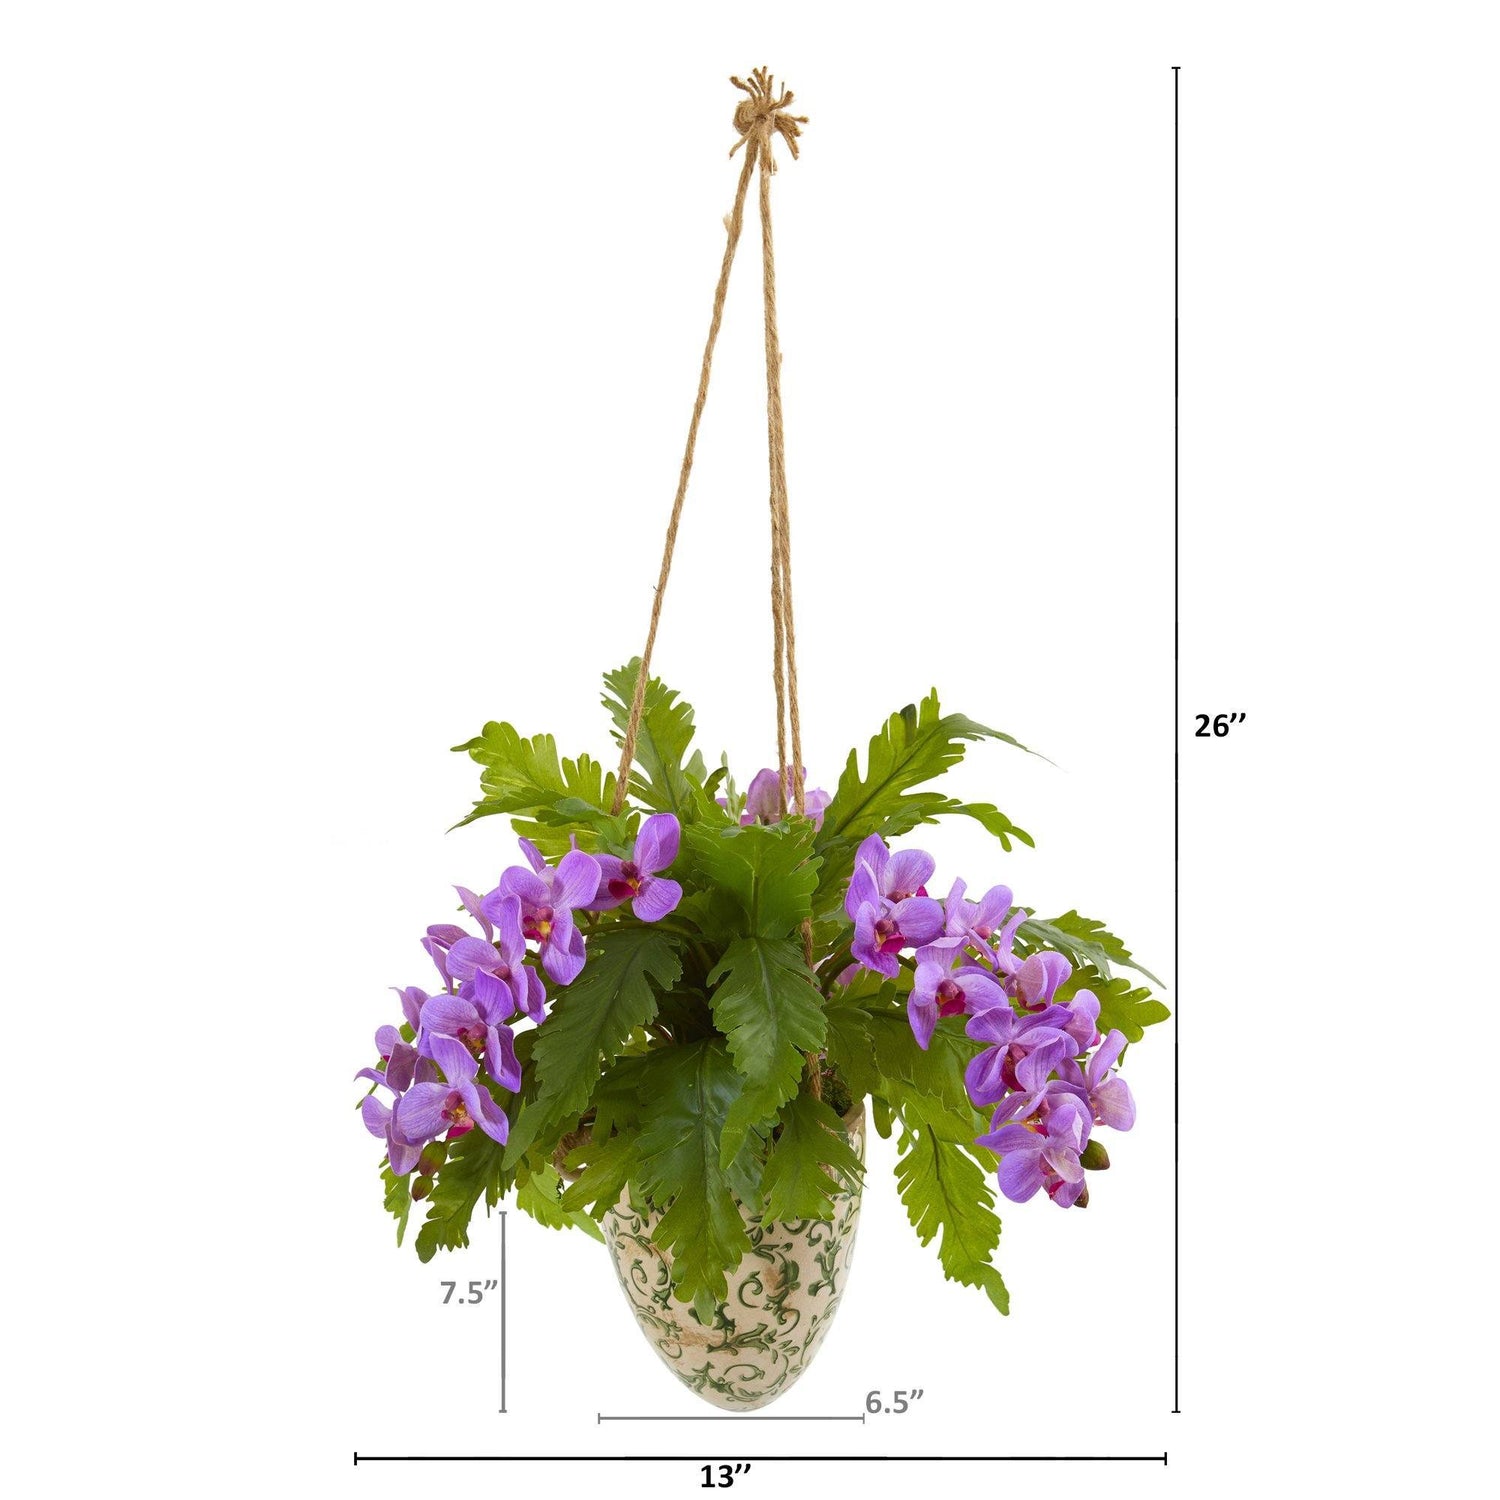 26” Phalaenopsis Orchid and Fern Plant in Hanging Vase